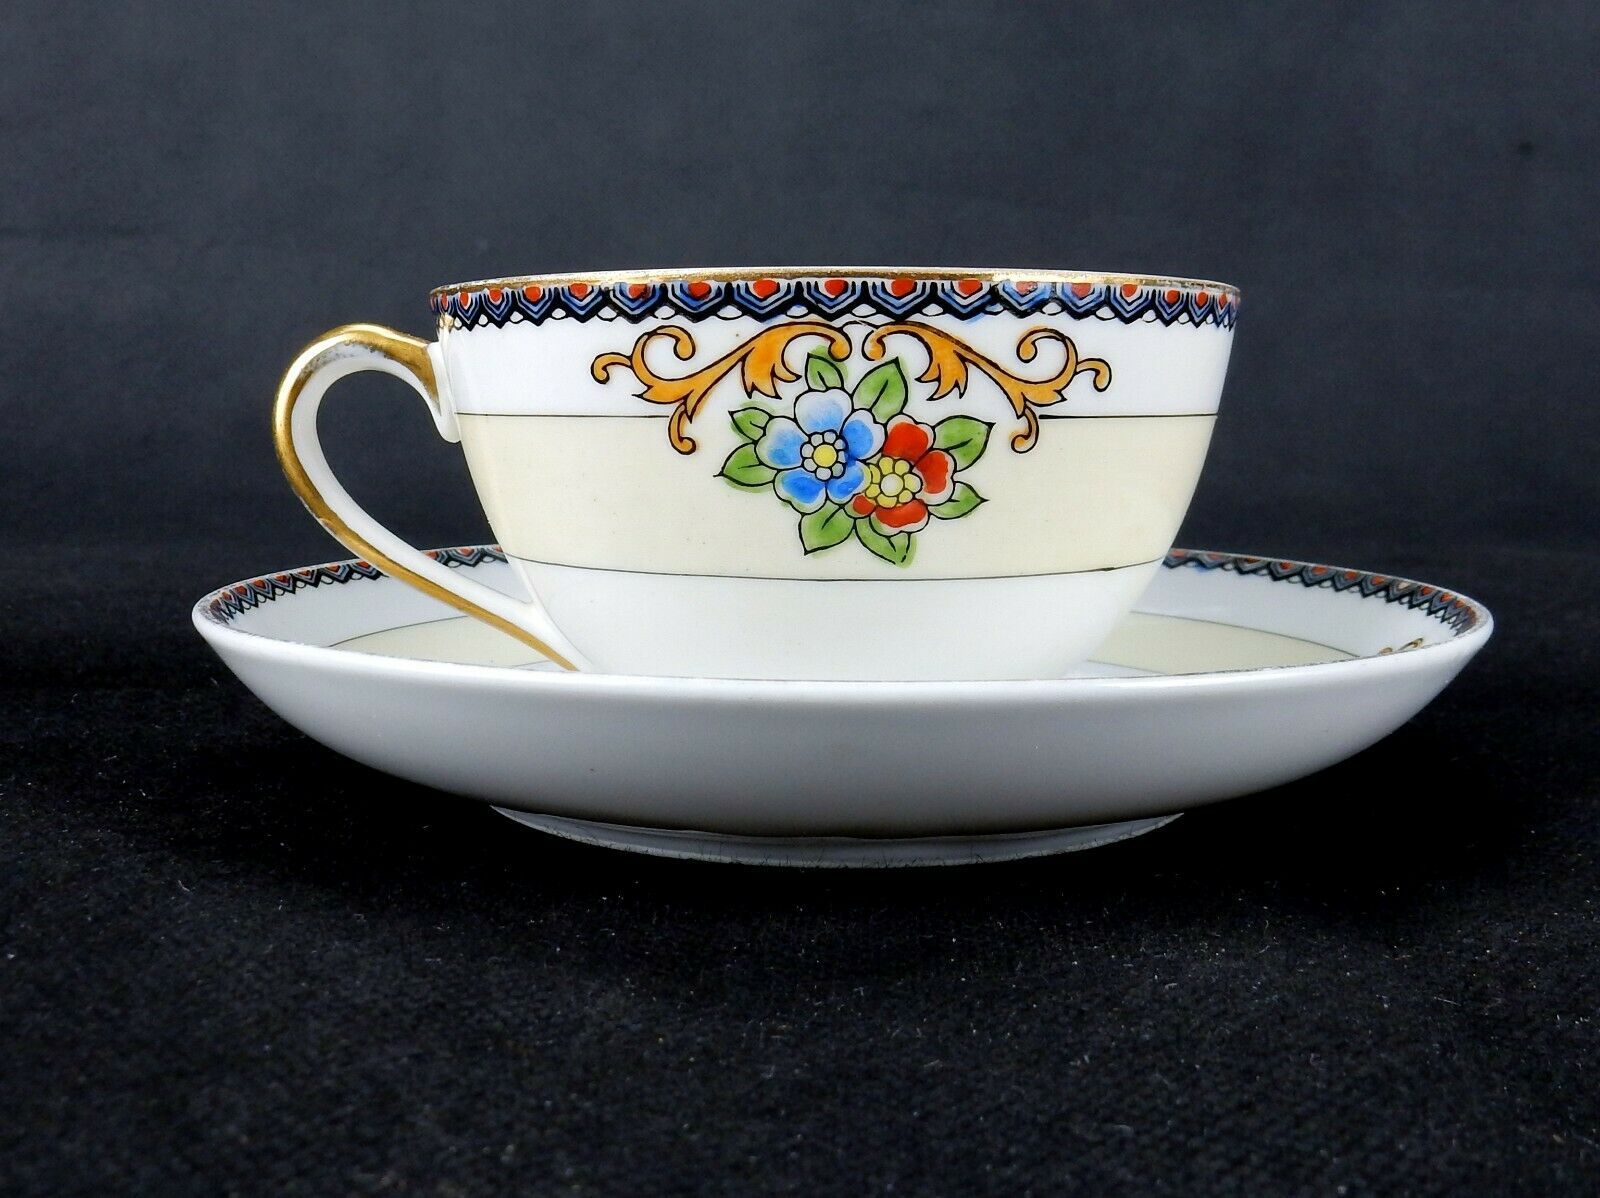 Coffee Cup Saucer & Cake Plate Made in Japan Mix n Match Glass Silver Plate Tiny Coffee Cup and Saucer Vintage China Coffee Trio